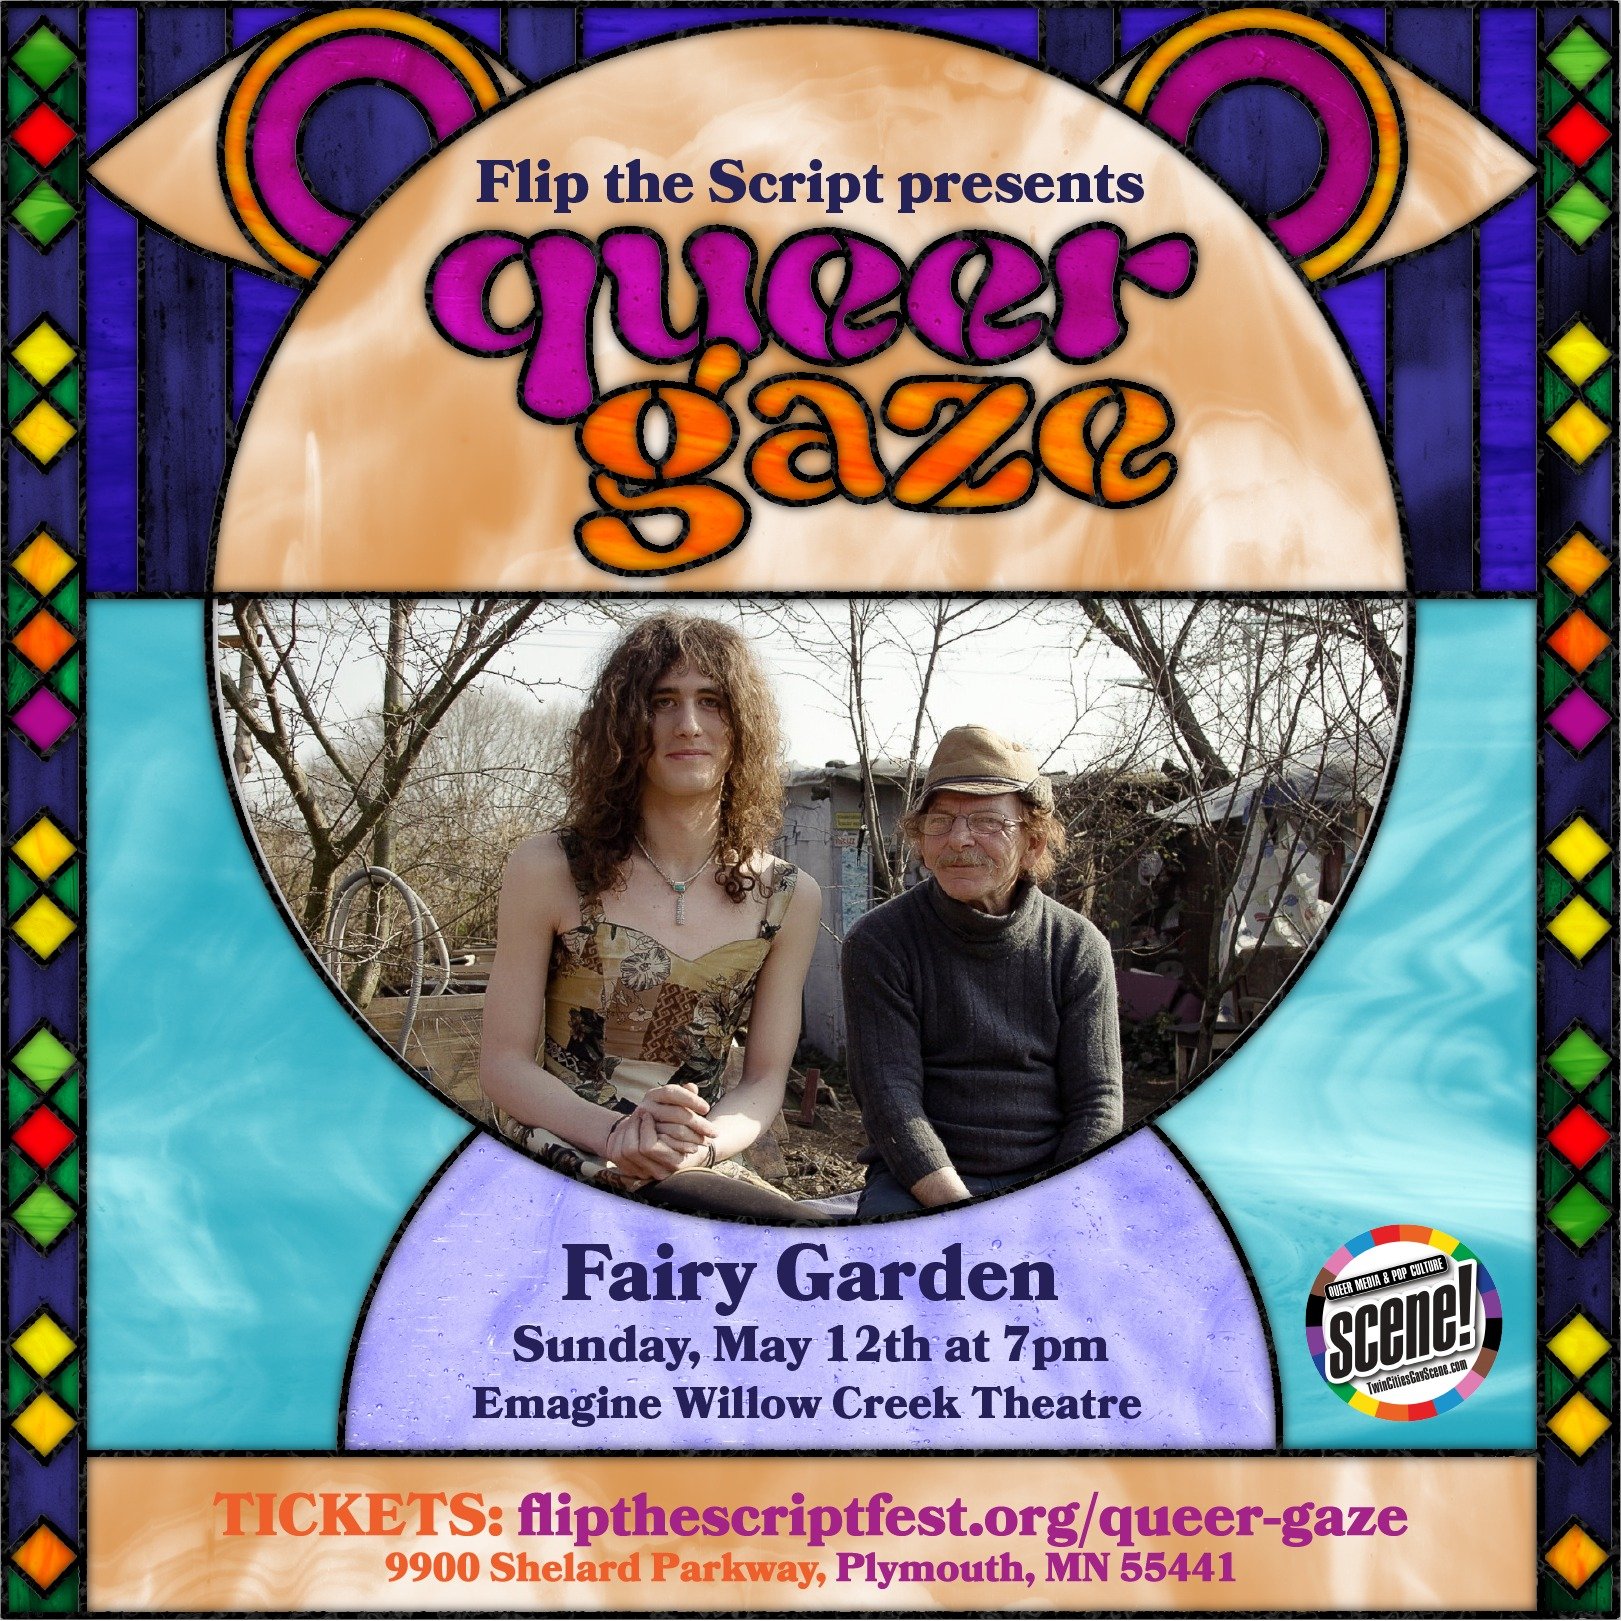 Queer Gaze presents FAIRY GARDEN, playing Sunday May 12th at 7pm at @emaginemn Willow Creek Theater. Bio link for tix!

On the outskirts of Budapest, in the heart of the woods, hides a ramshackle little hut. Inside, two social outcasts have formed th